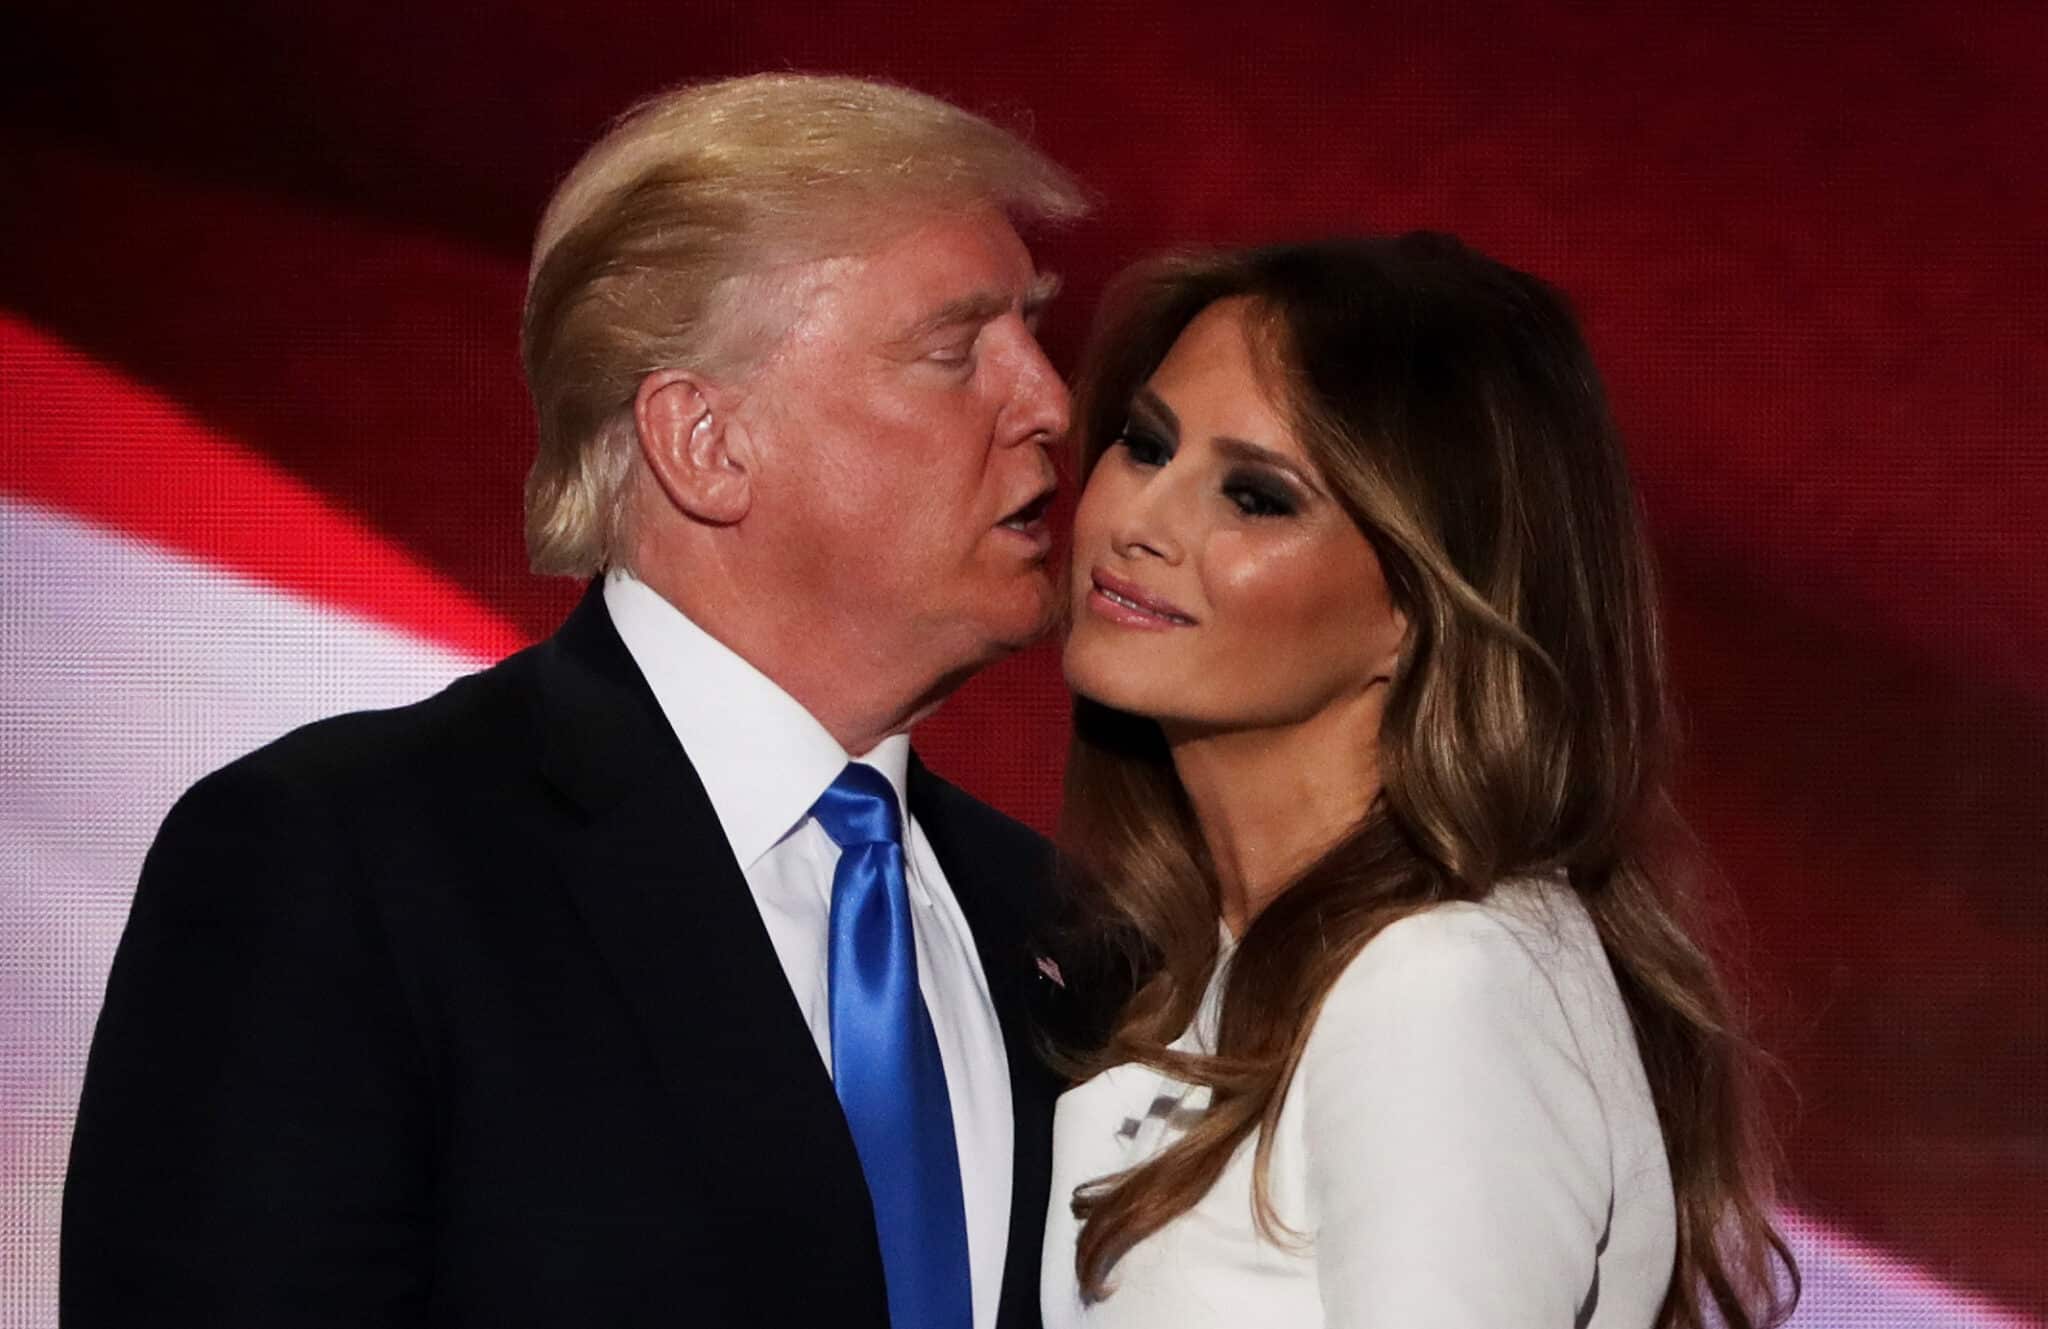 Melania Trump links arms with serviceman instead of Donald amid divorce rumors